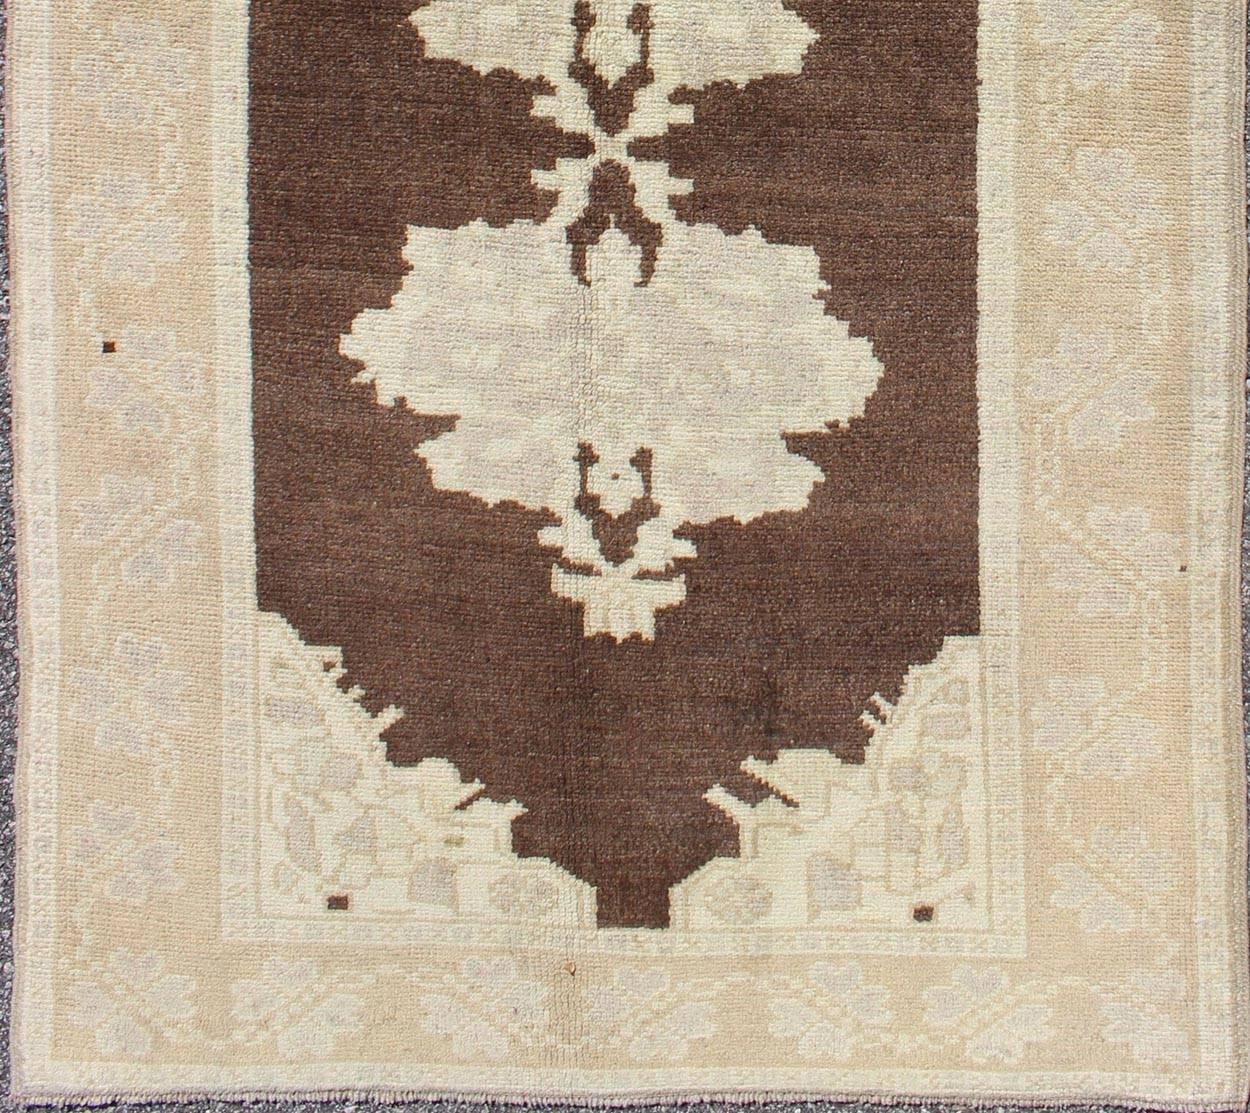 Brown background vintage Turkish Oushak runner with medallions in cream and ivory, rug en-604, country of origin / type: Turkey / Oushak, circa mid-20th century

This beautiful vintage Oushak runner from mid-20th century Turkey features a Classic